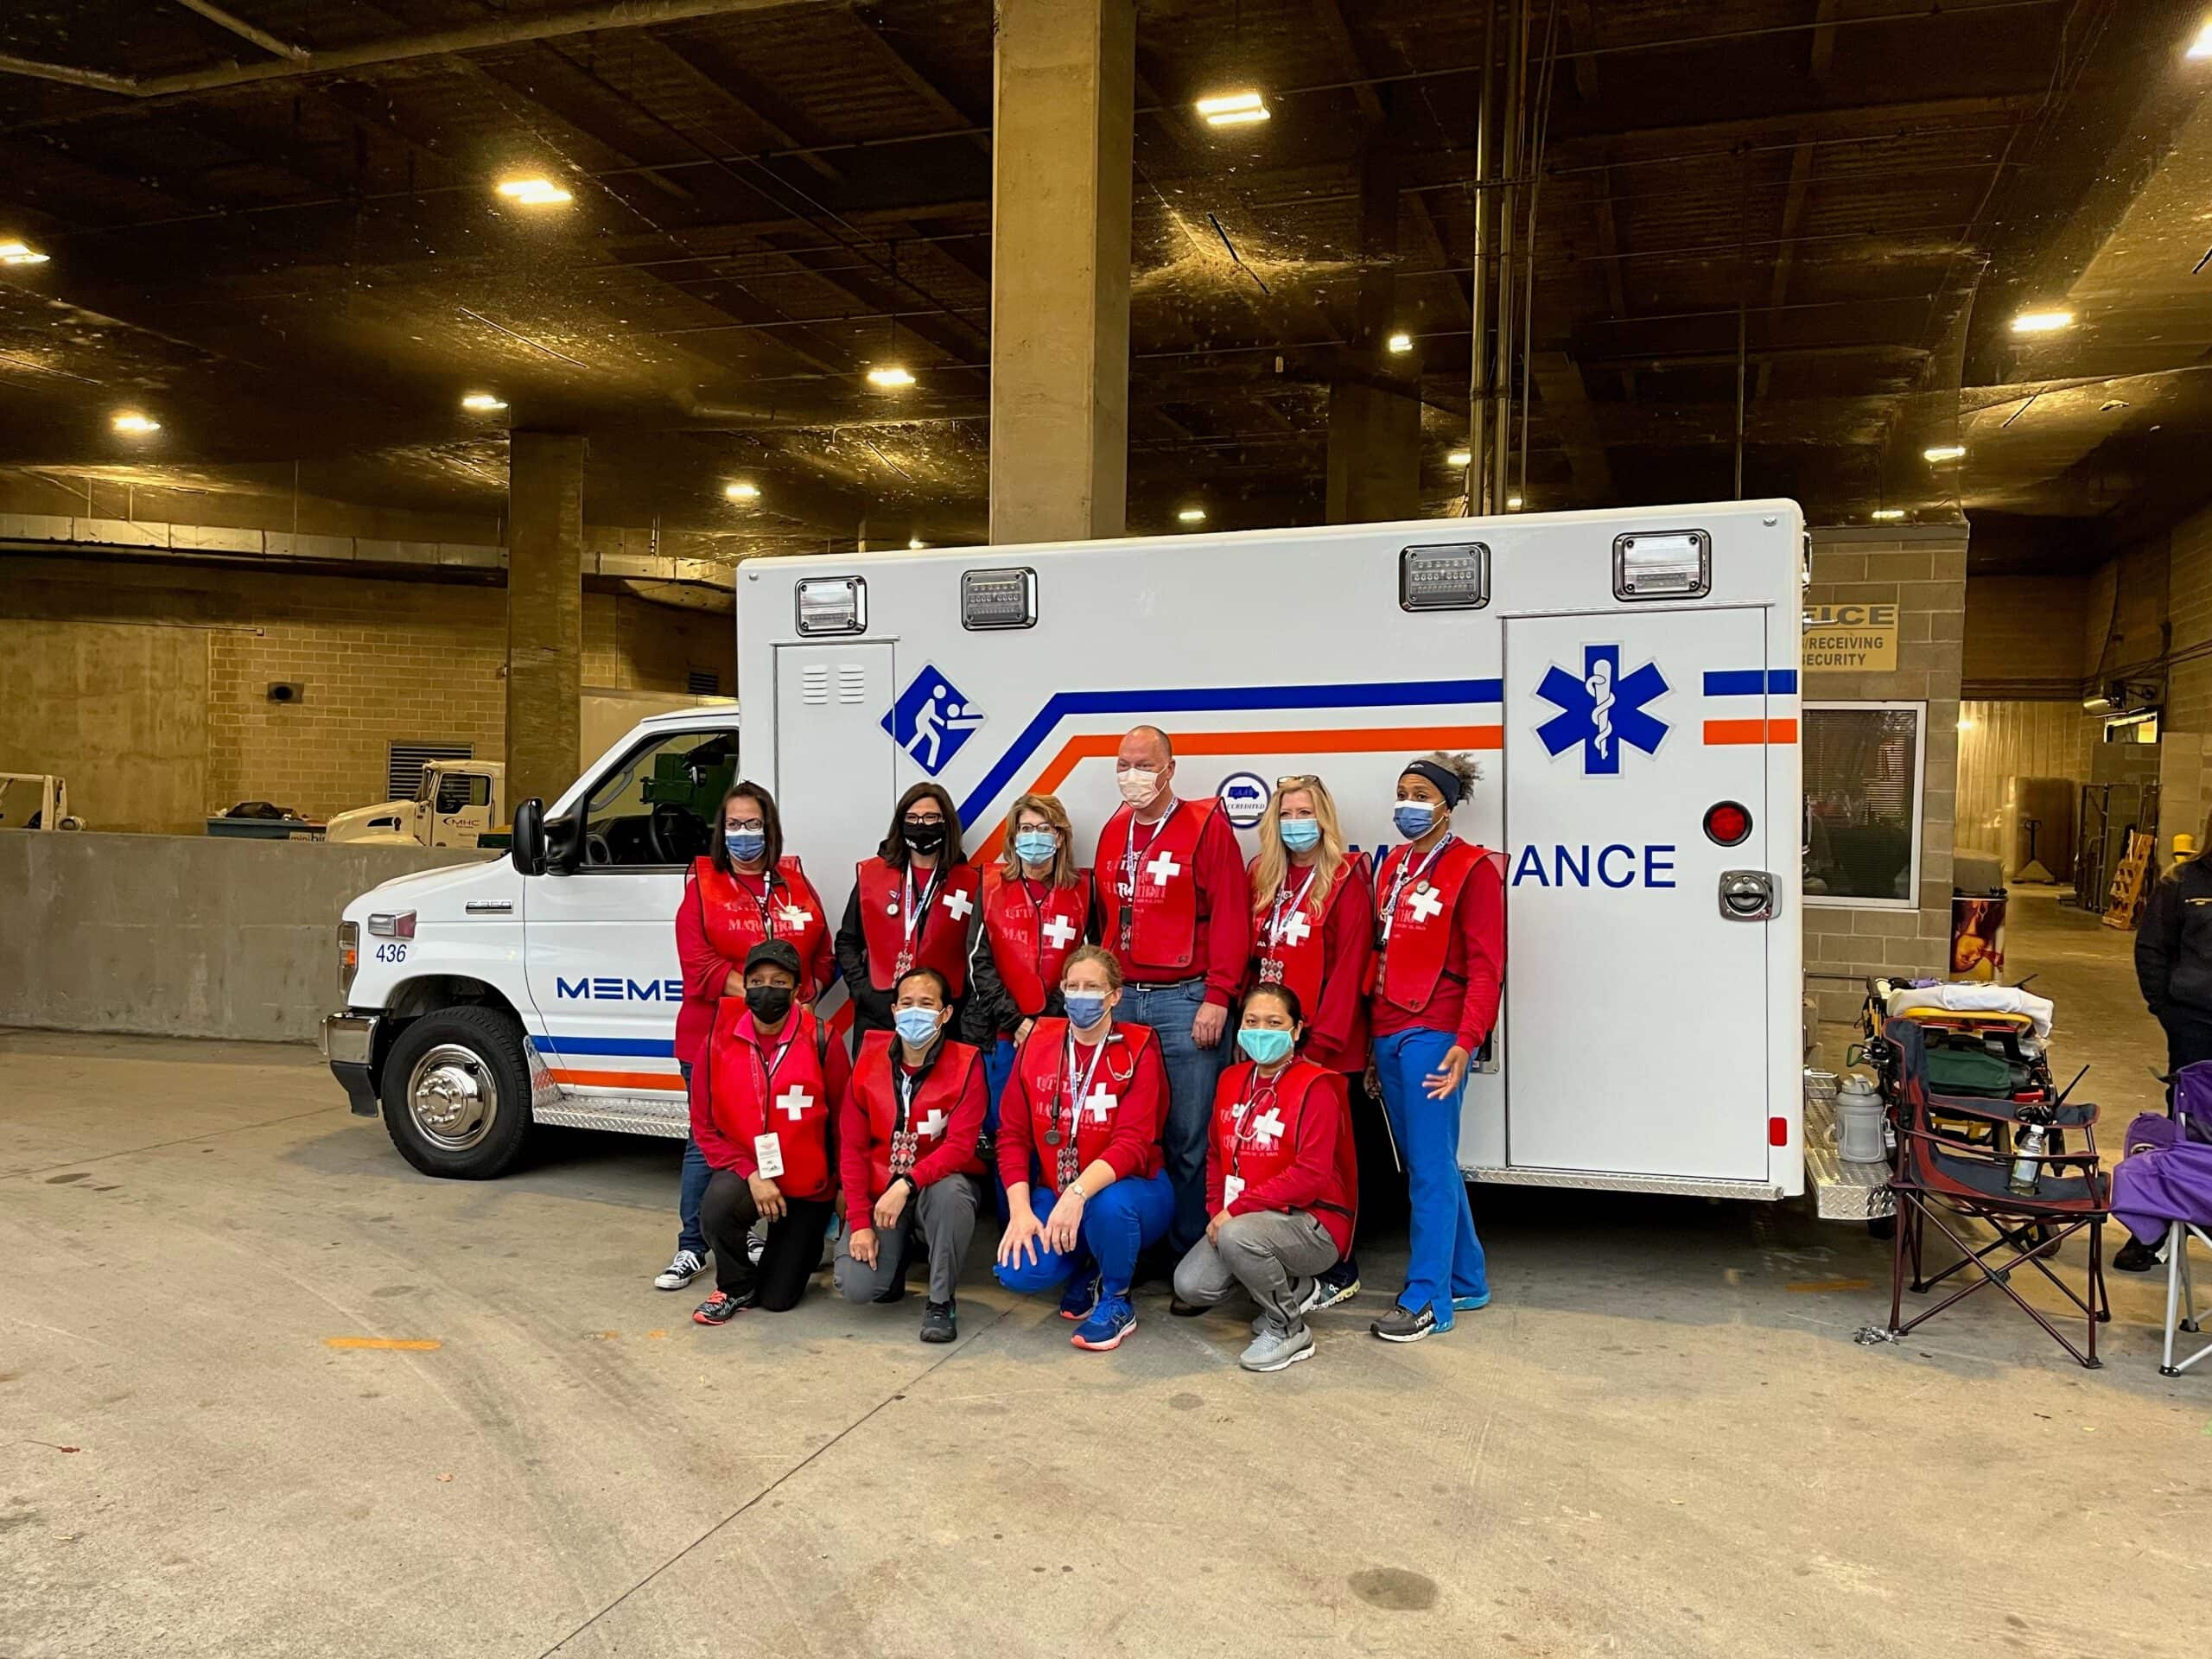 Volunteers stand in front of an ambulance